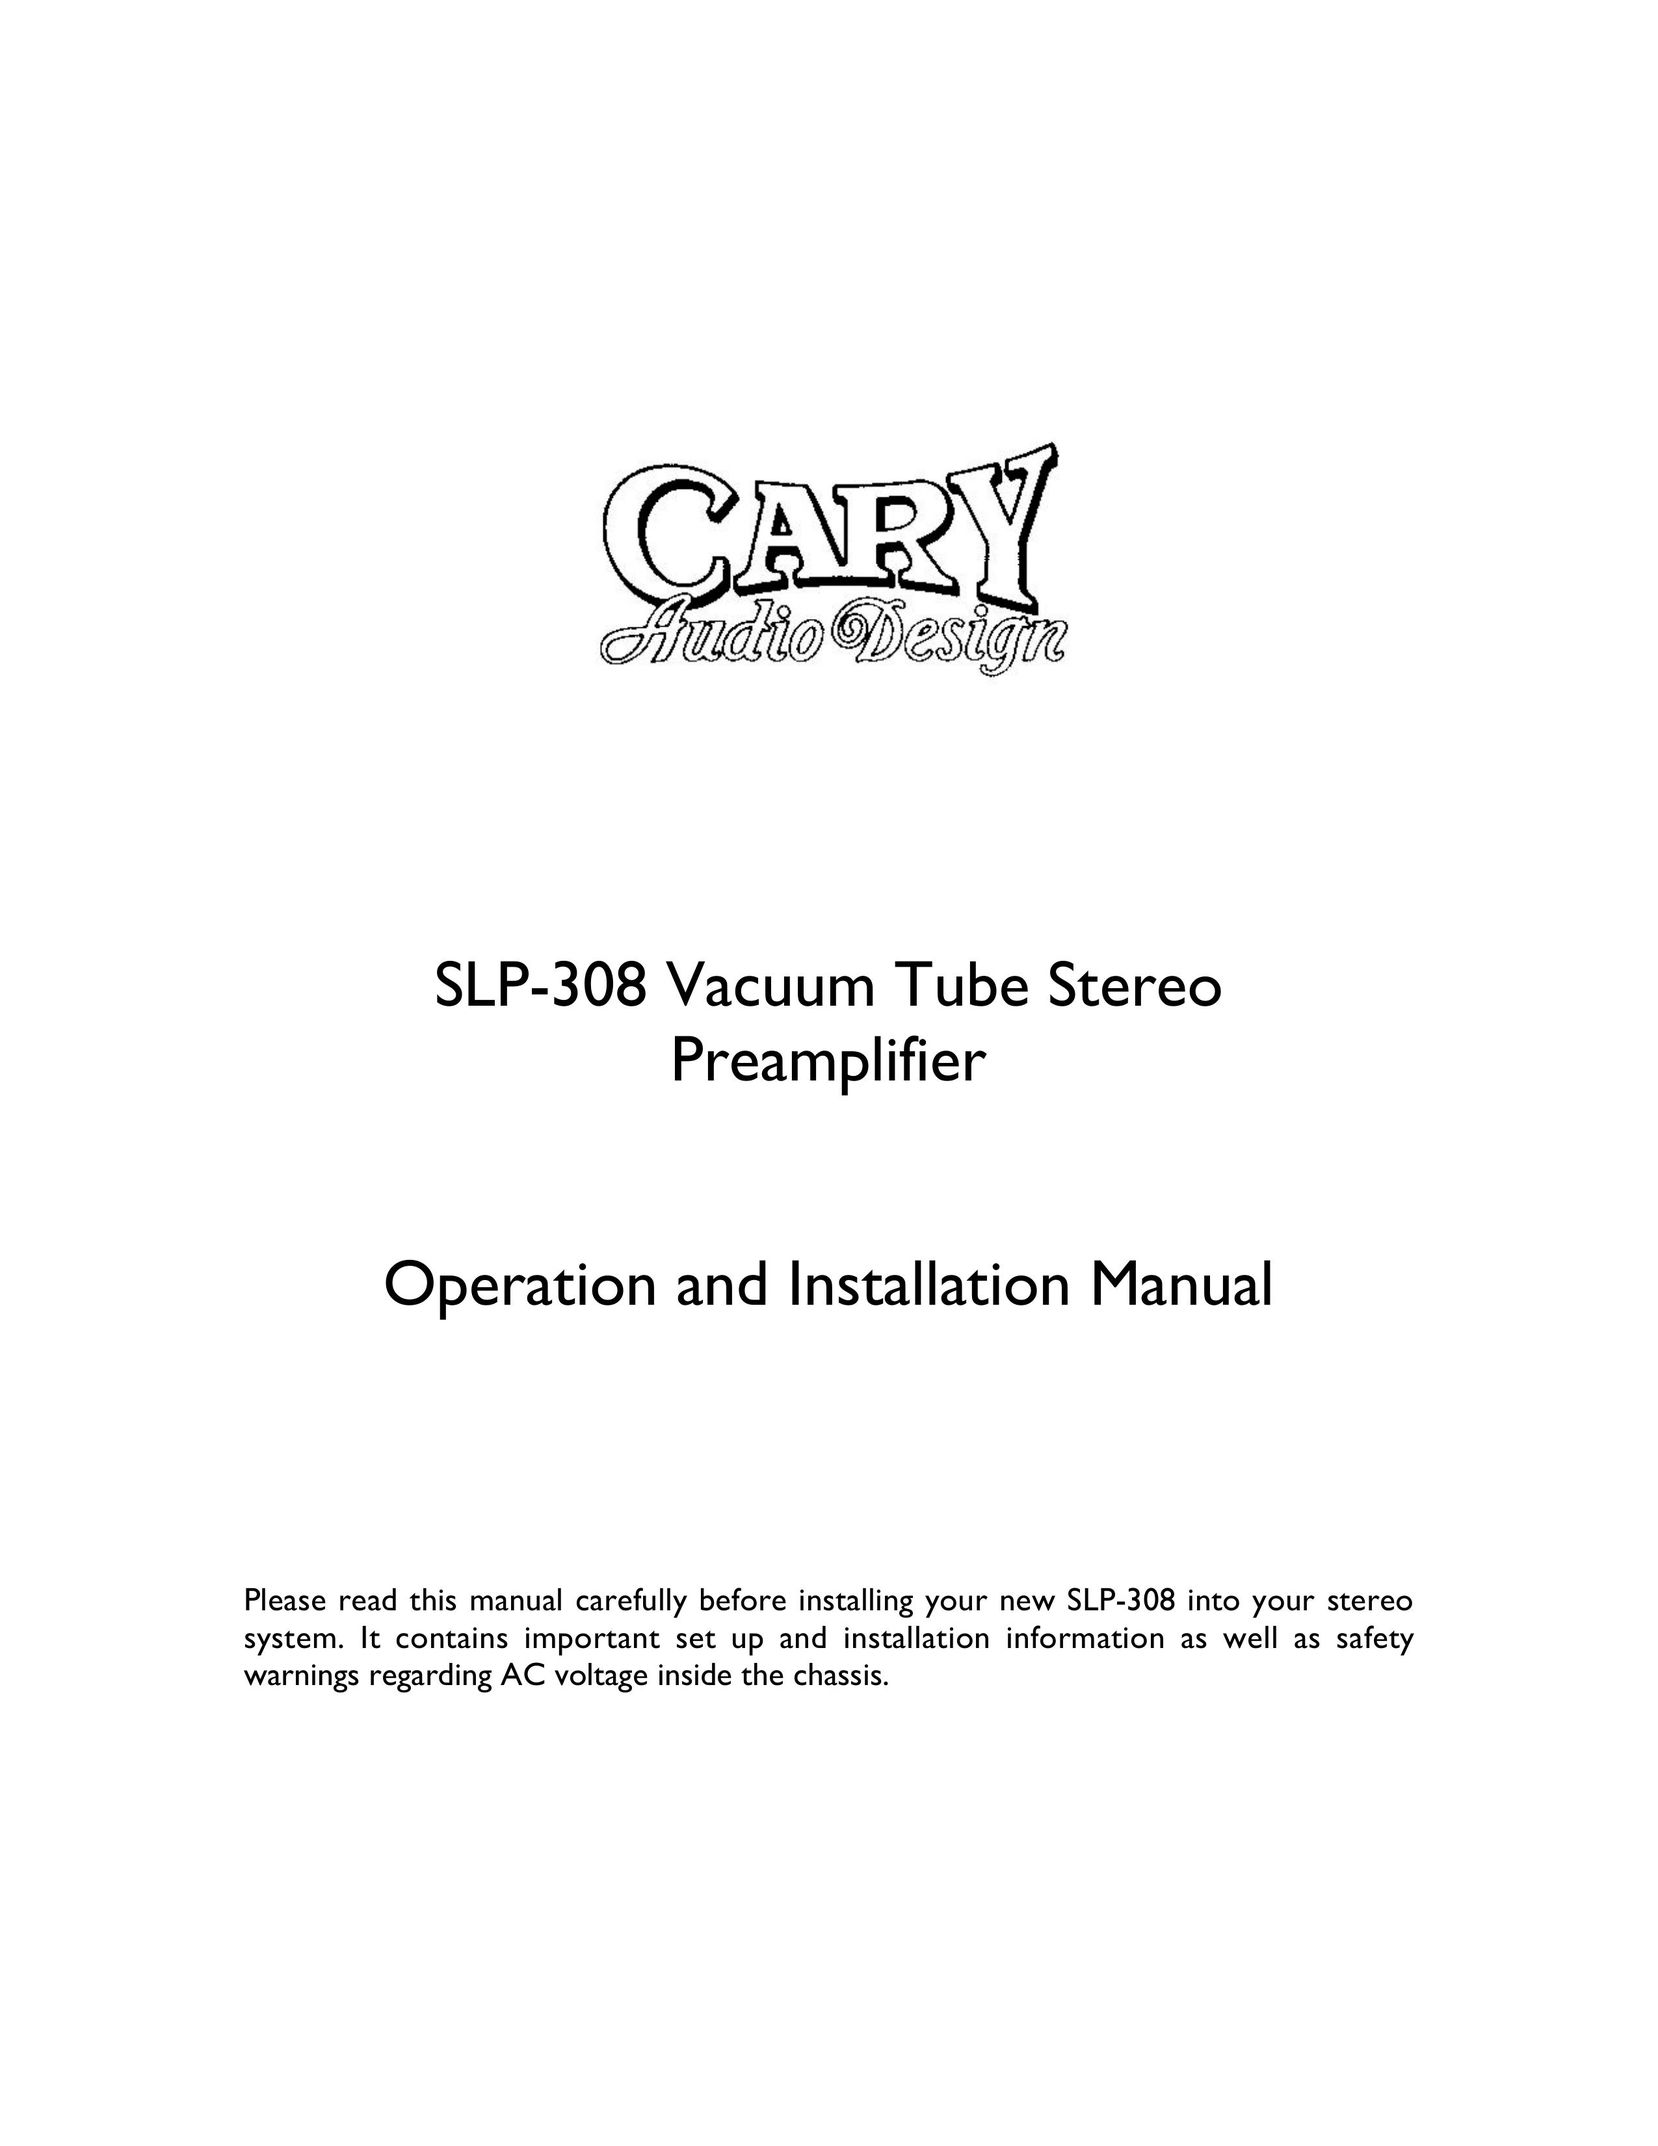 Cary Audio Design SLP-308 Stereo Amplifier User Manual